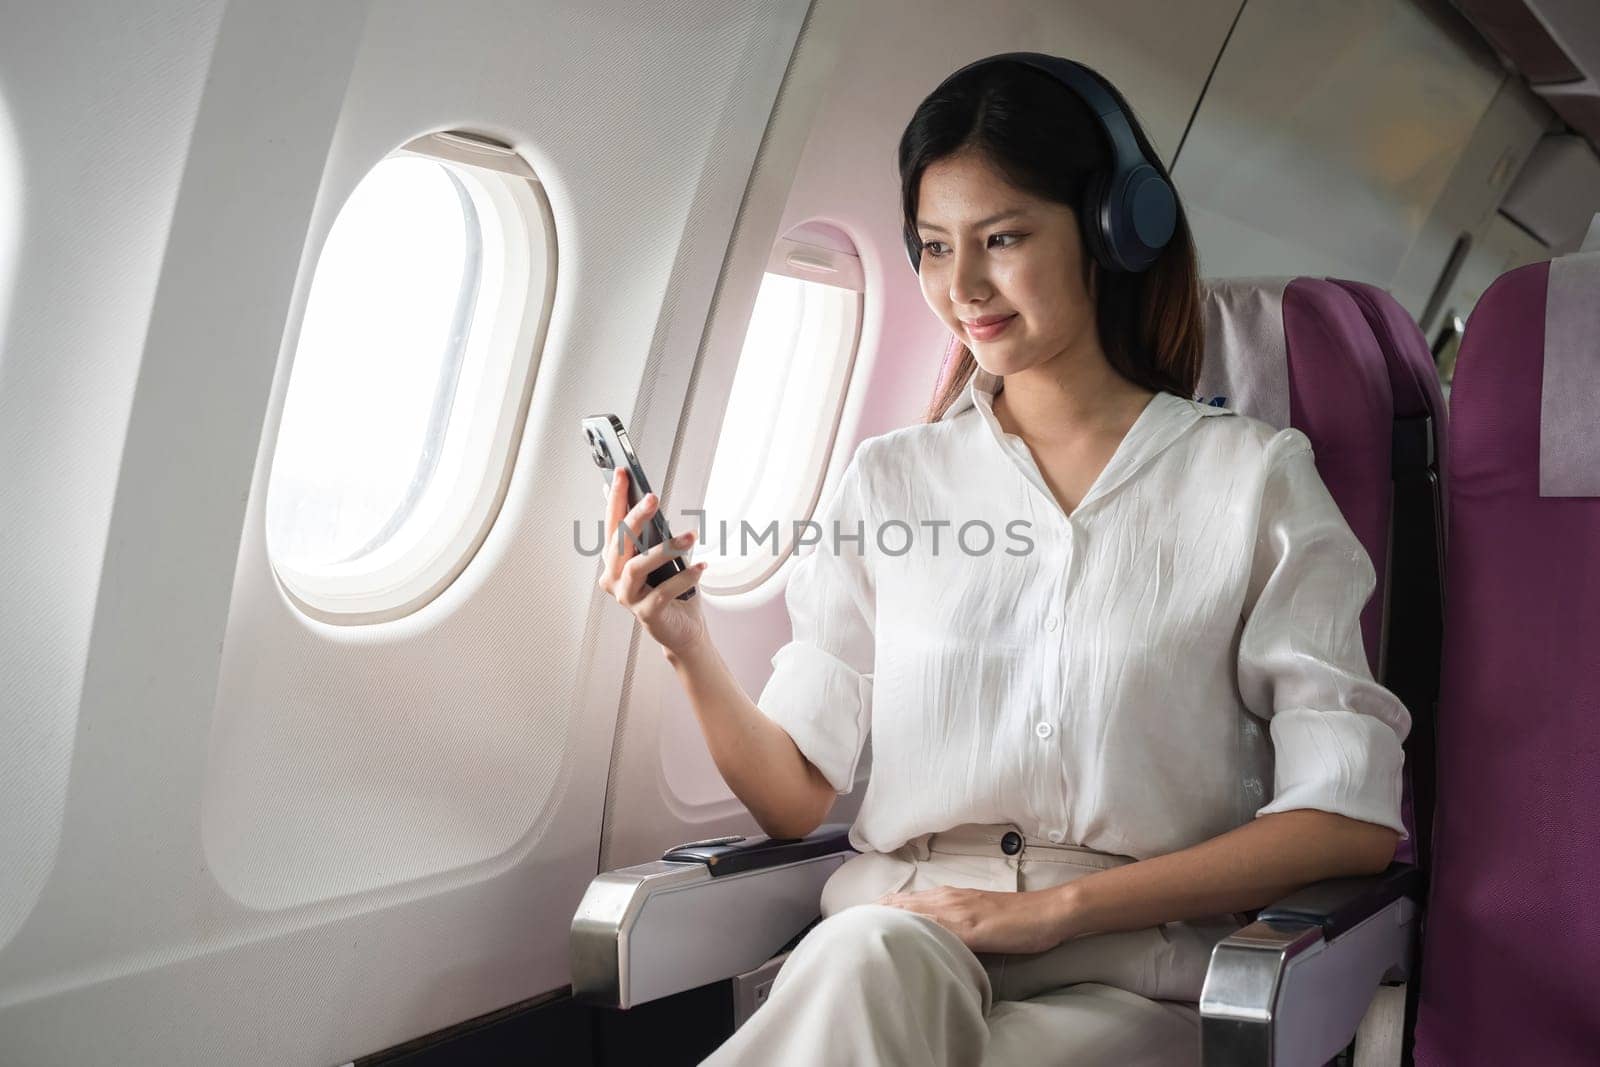 Asian woman using smartphone and headphones on airplane. Concept of air travel, technology, and in-flight entertainment.